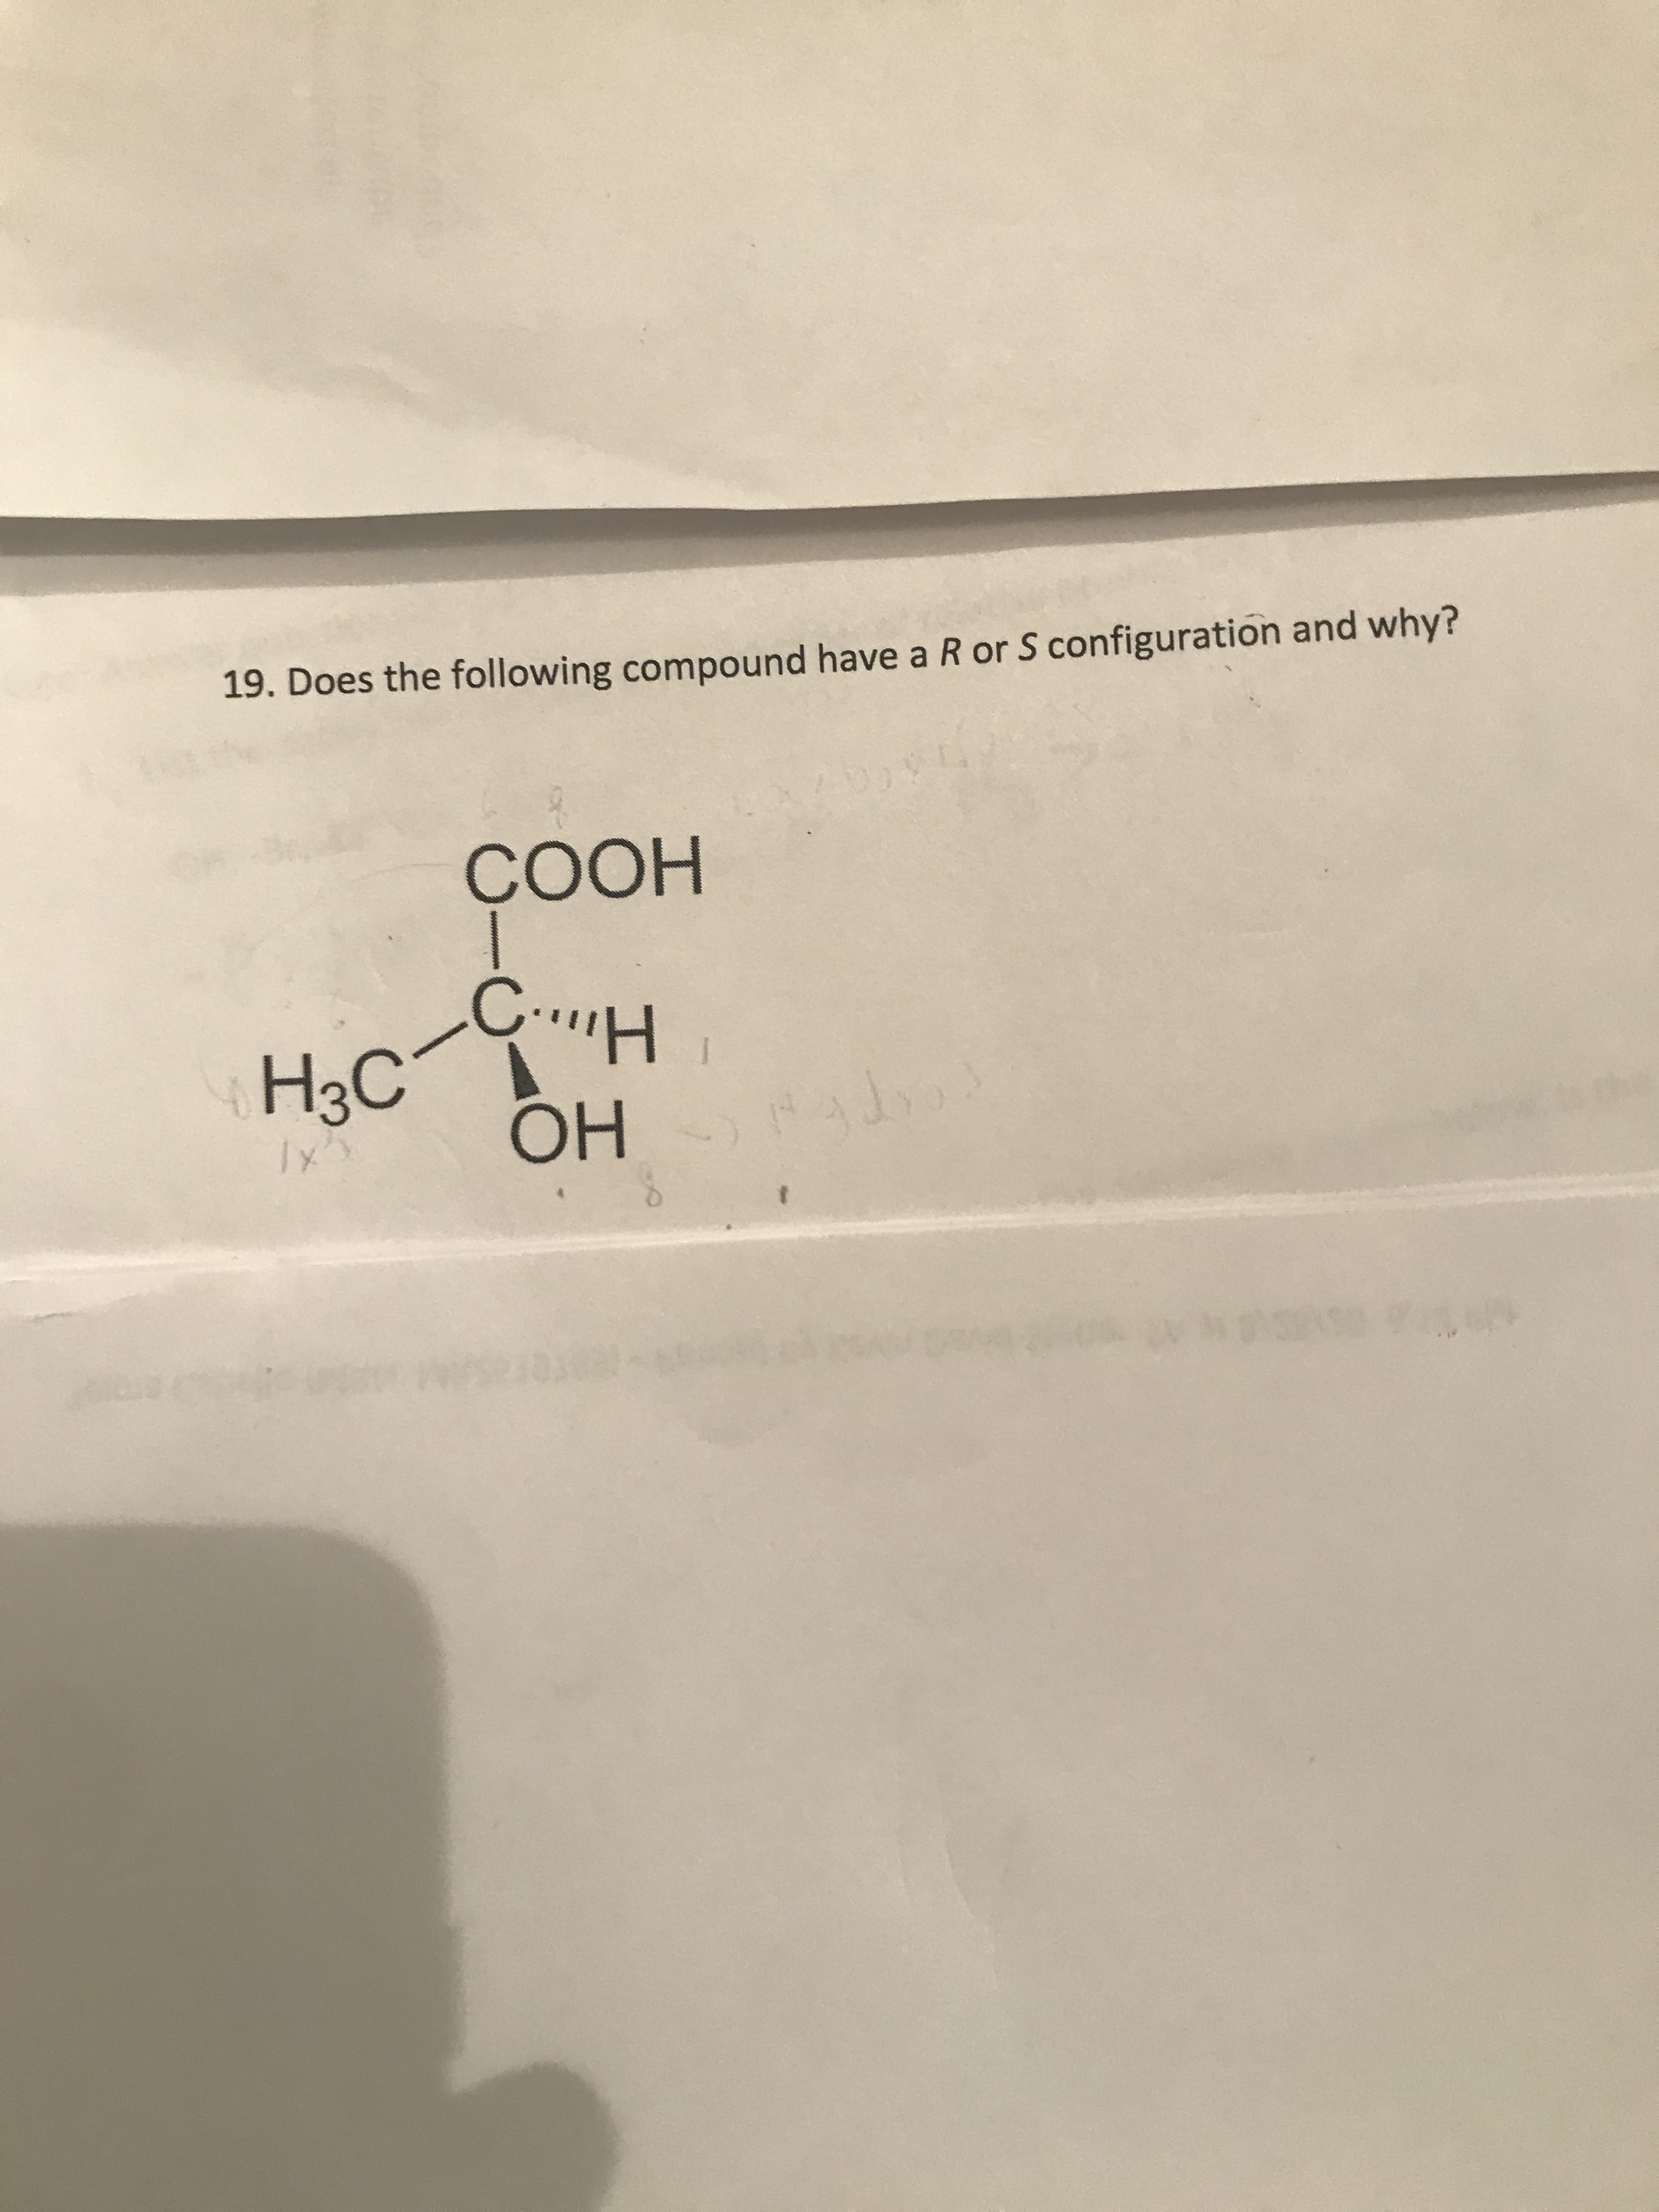 19. Does the following compound have a R or S configuration and why?
СООН
H3C
OH
